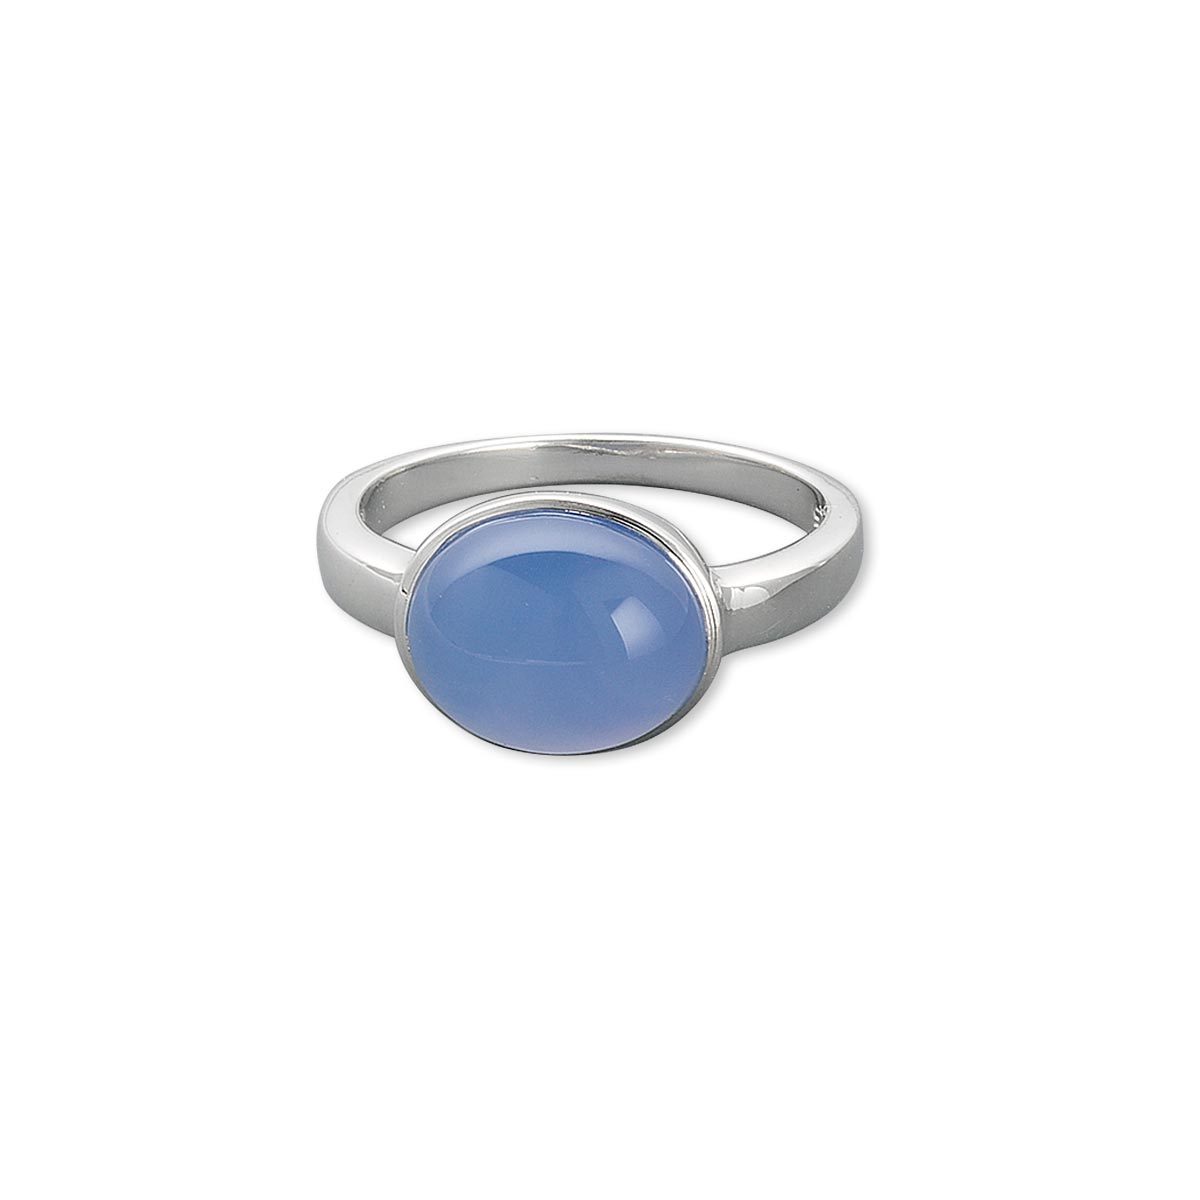 Ring, sterling silver and blue chalcedony (dyed), 11x9mm oval cabochon ...